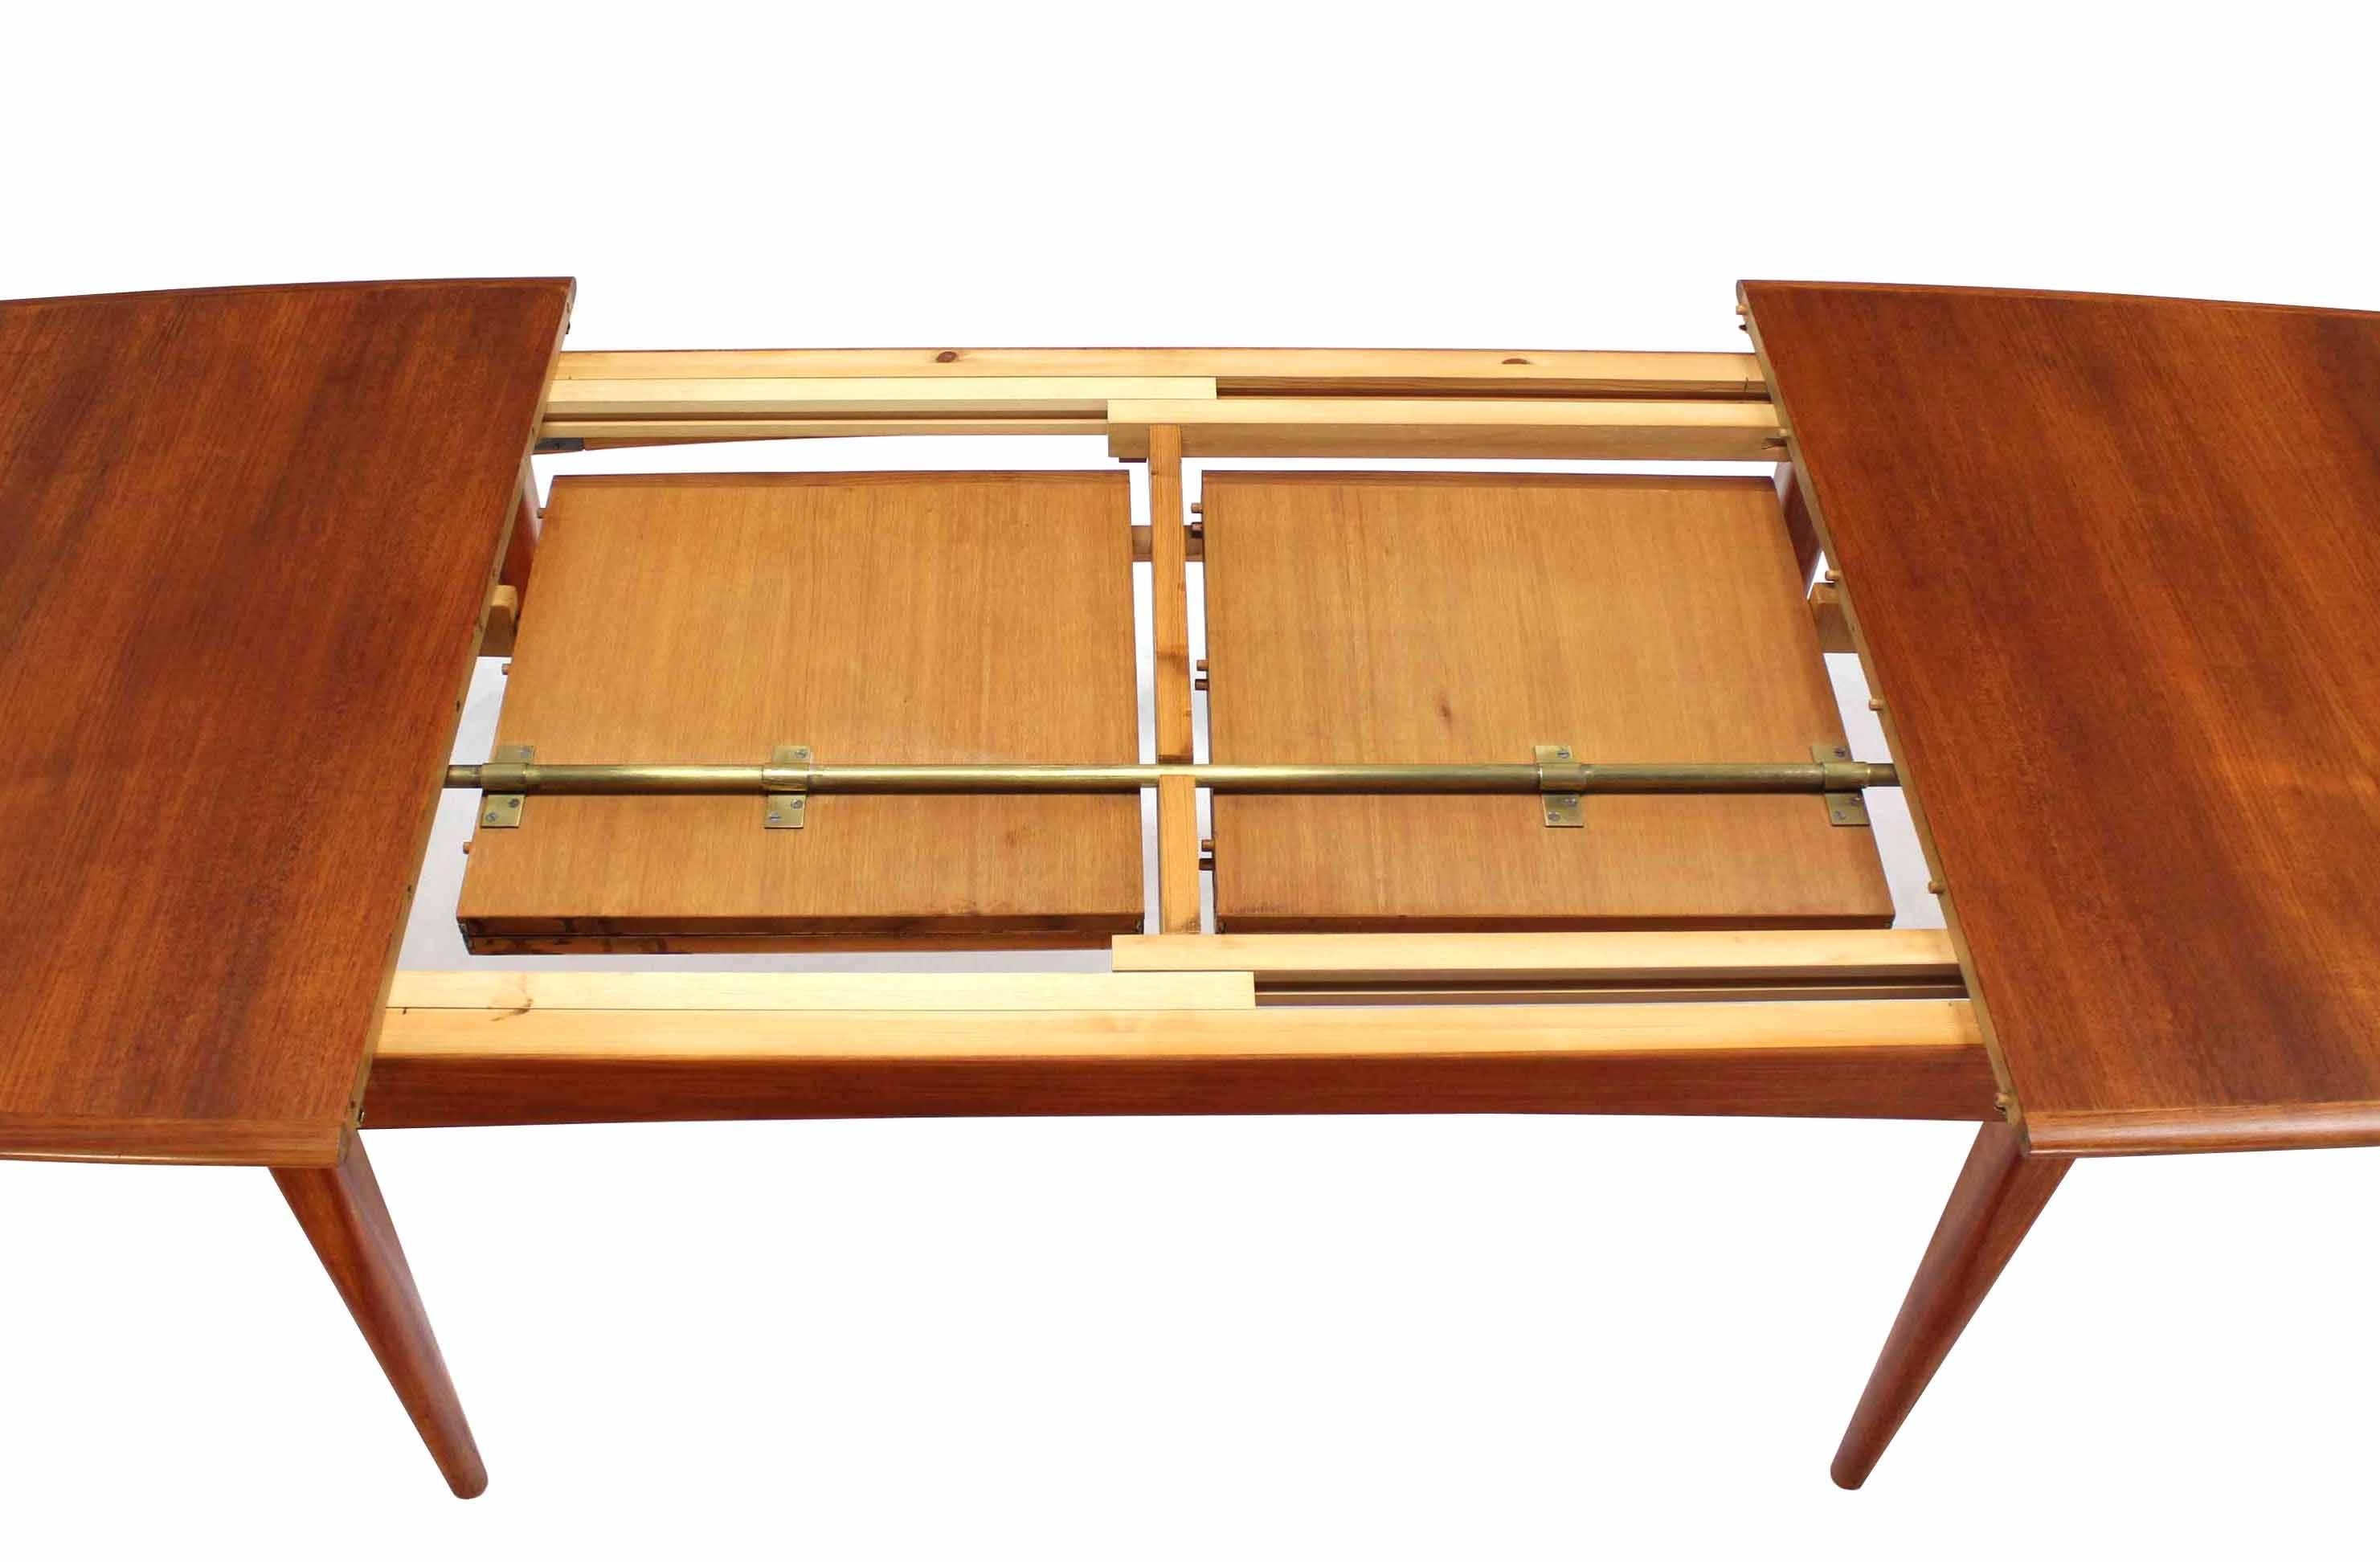 Very nice Danish mid century modern dining table w/ 2x21" long "pop up" self storing leaves.